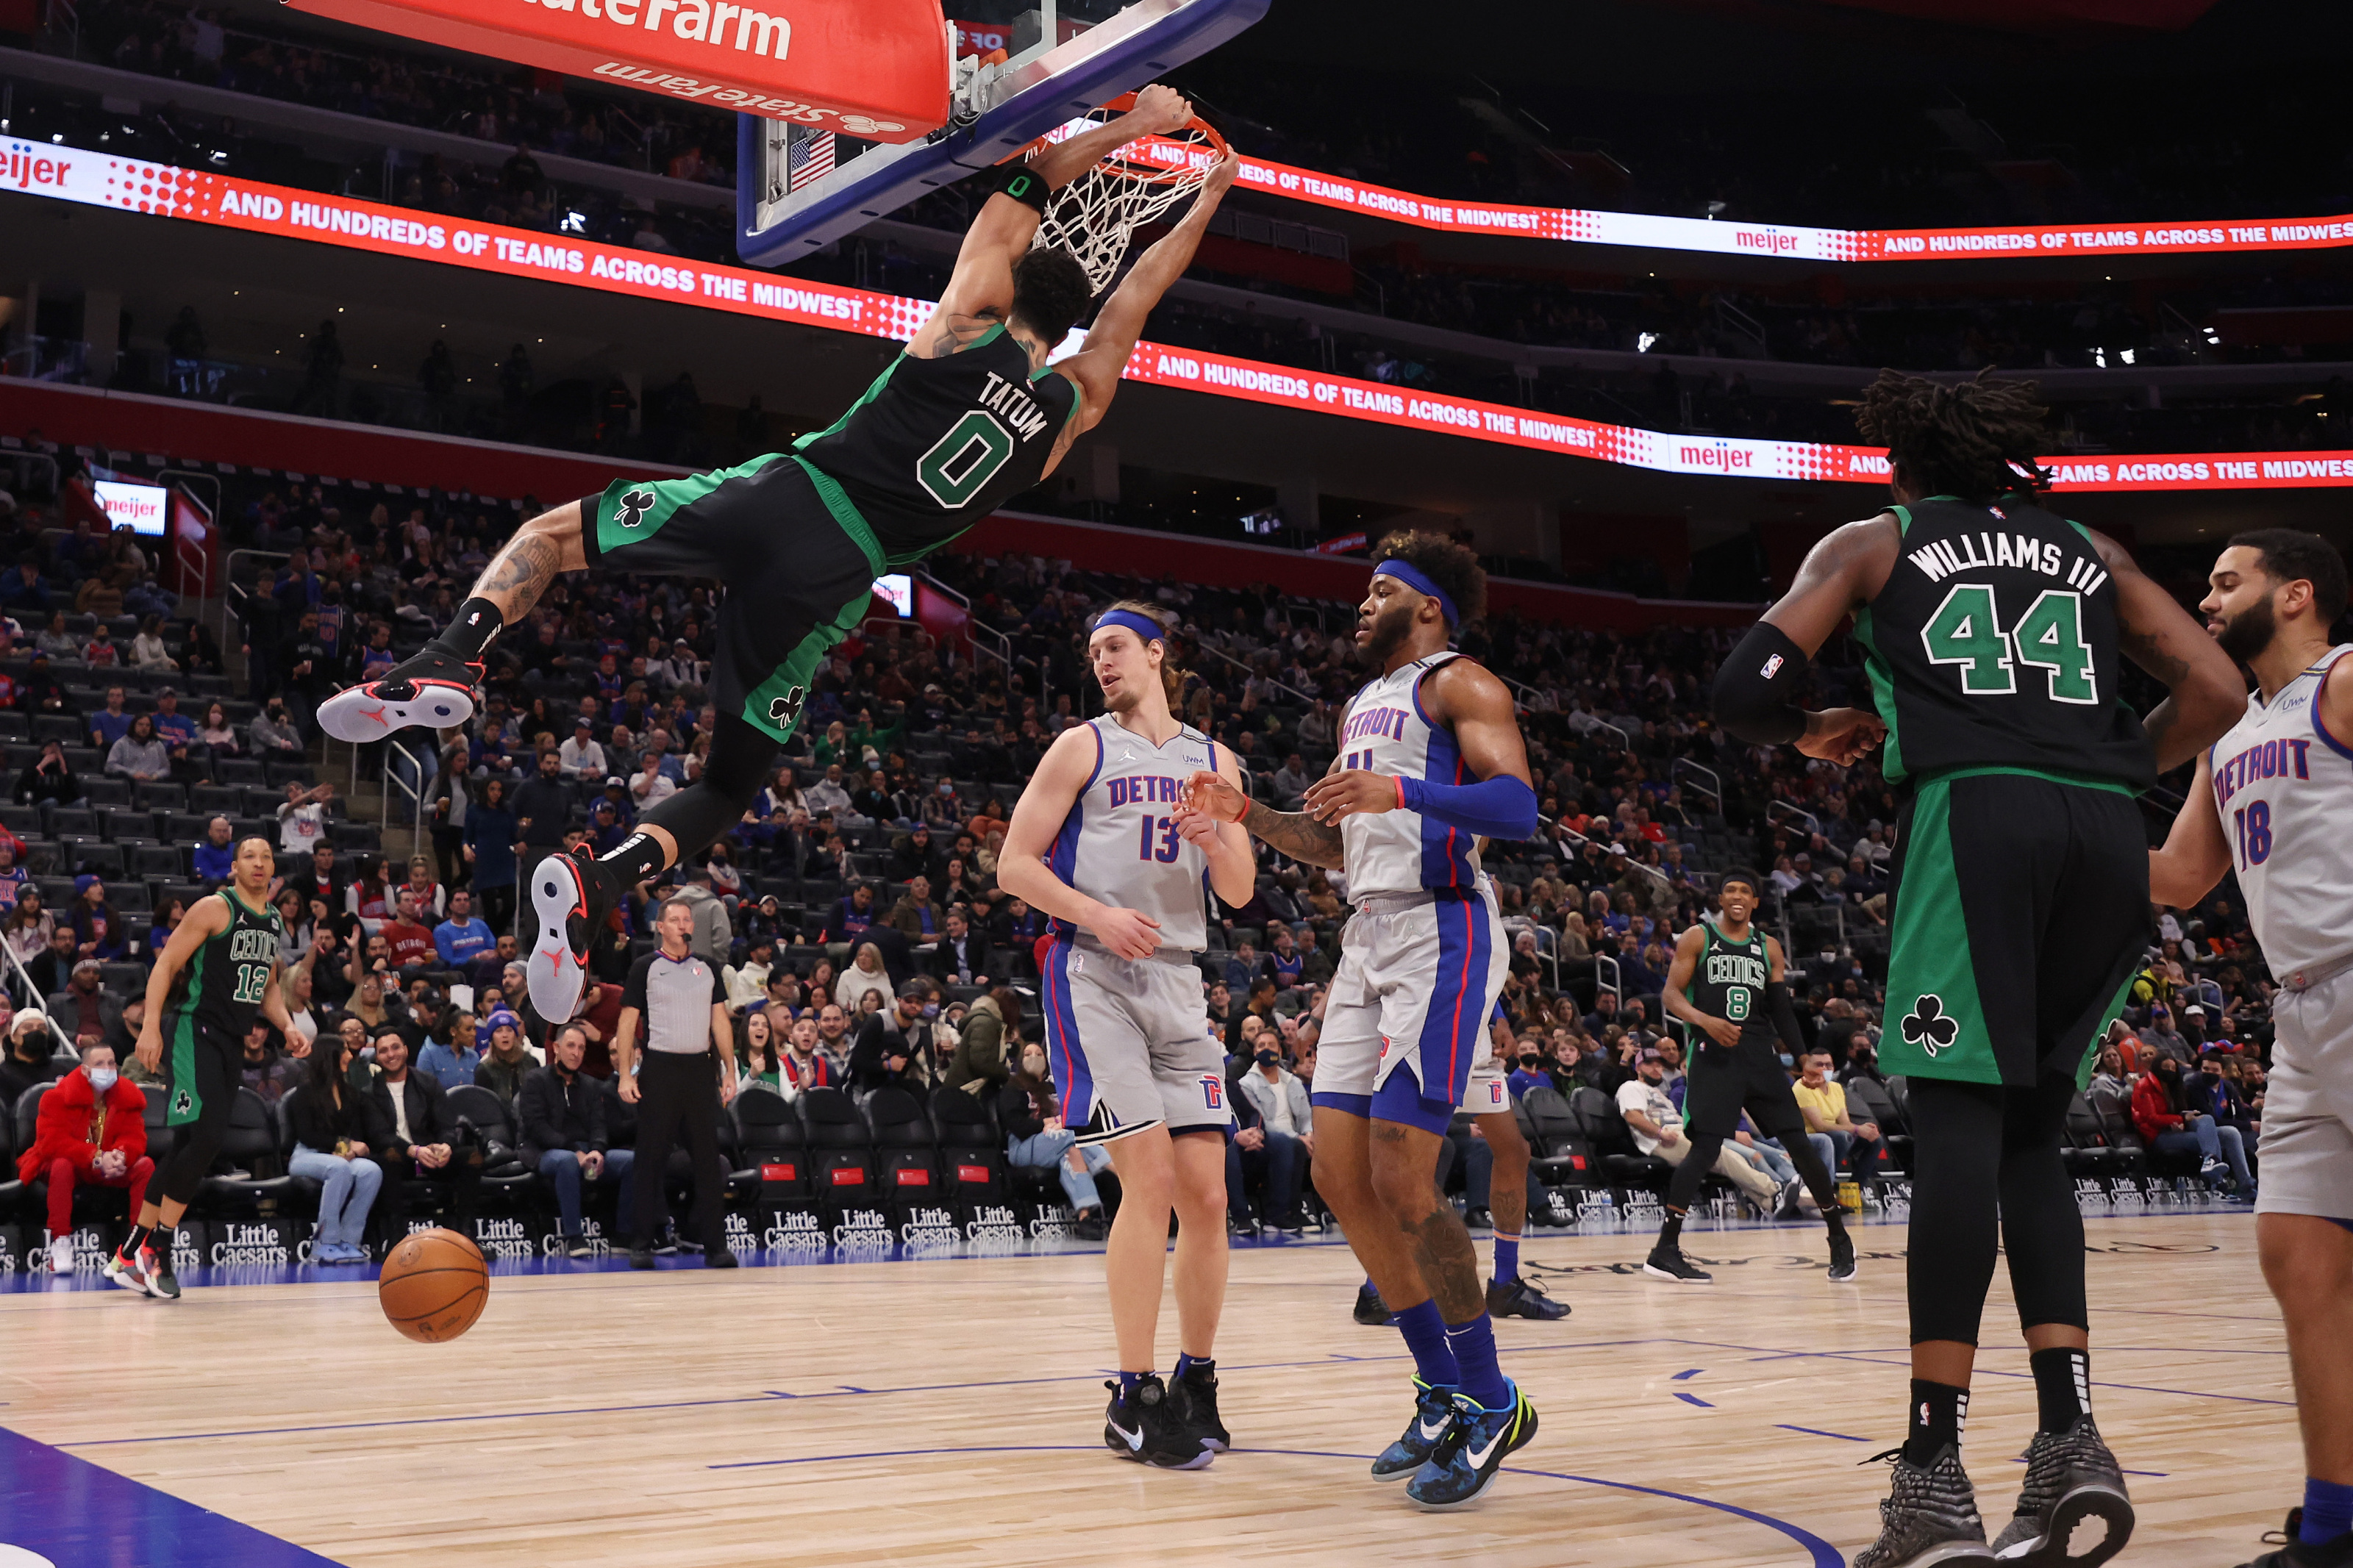 Celtics Roster & Lineup vs. Nets; Latest on Kyrie Irving Injury